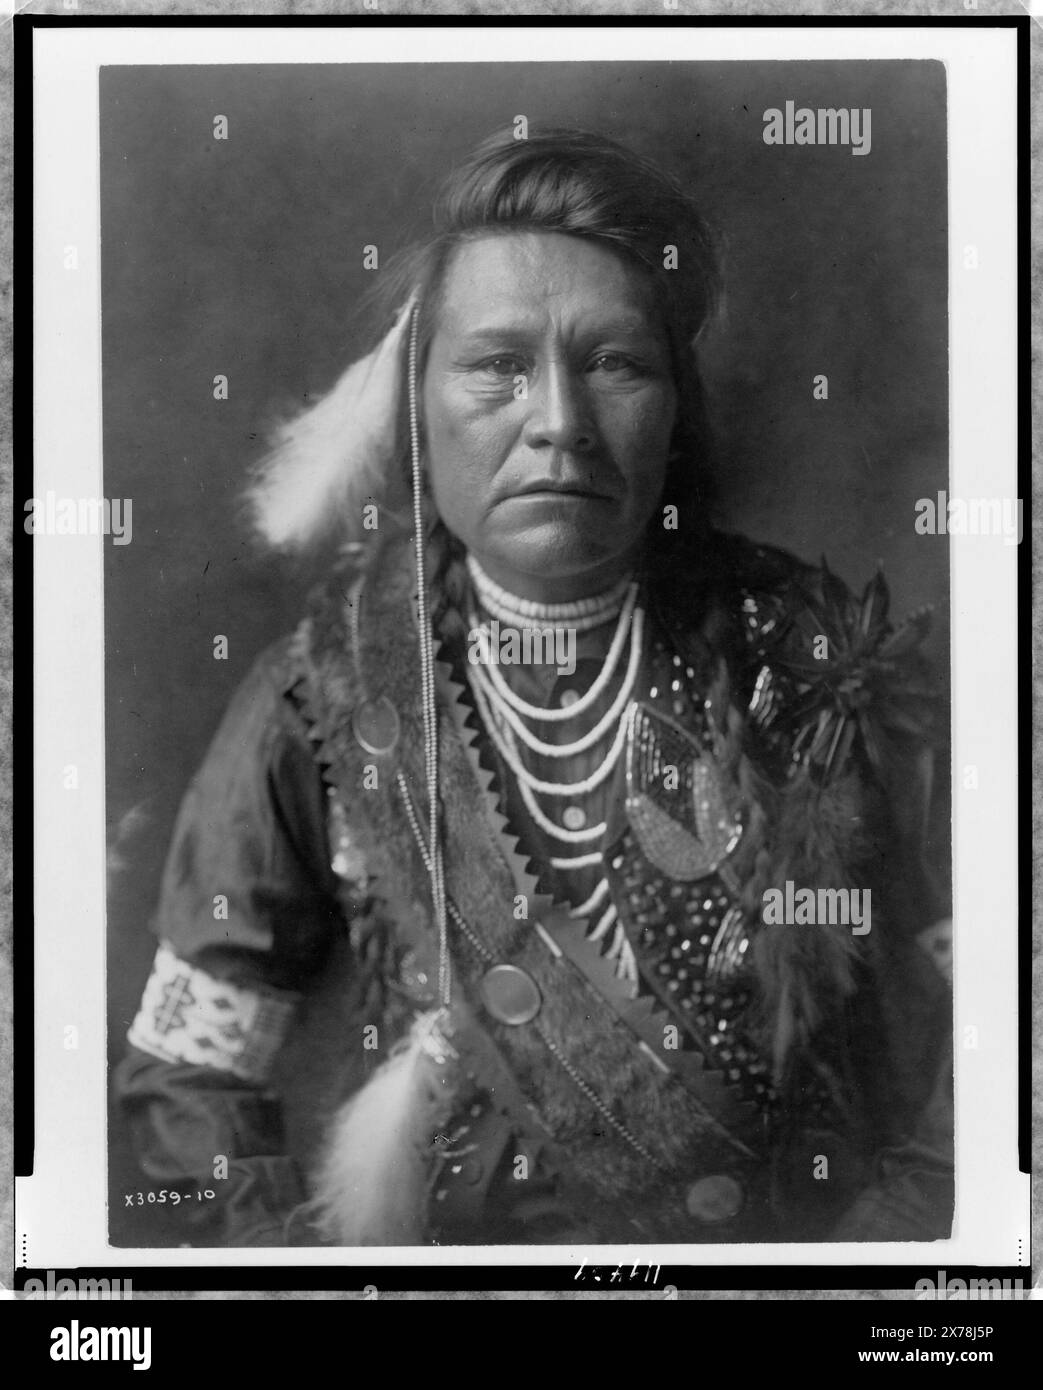 Inashah Yakima, Edward S. Curtis Collection ., Curtis no. 3059-10., Published in: The North American Indian / Edward S. Curtis. [Seattle, Wash.] : Edward S. Curtis, 1907-30, Suppl. v. 7, pl. 220.. Inashah. , Indians of North America, Clothing & dress, 1910. , Yakama Indians, Clothing & dress, 1910. Stock Photo